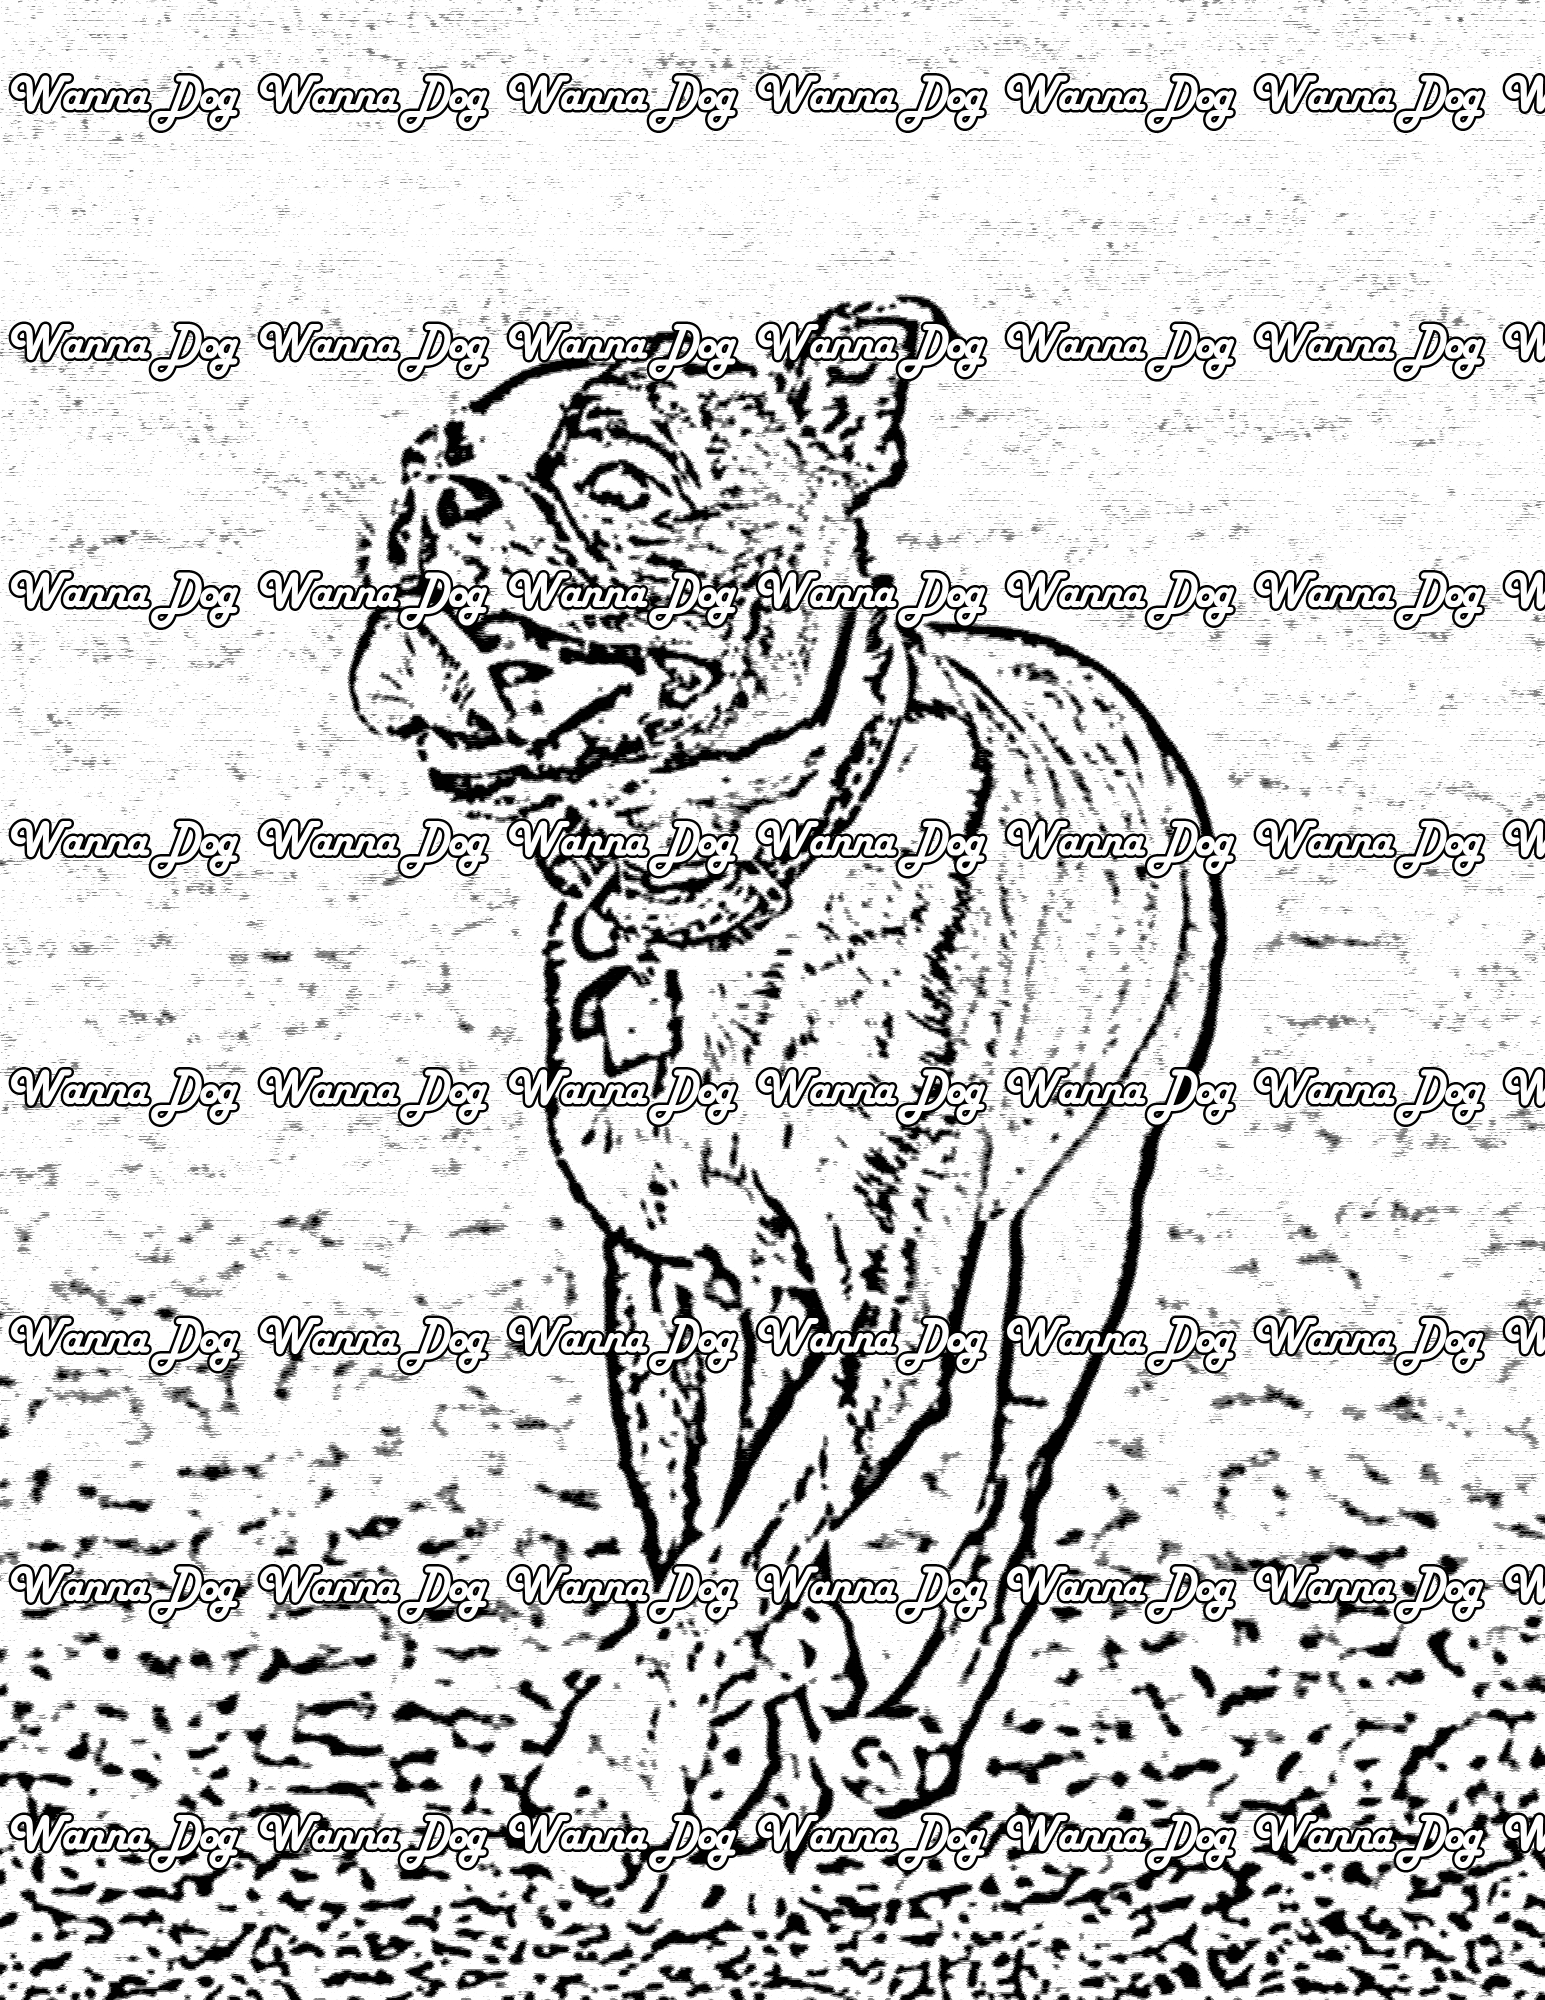 Boston Terrier Coloring Page of a Boston Terrier running with their tongue out